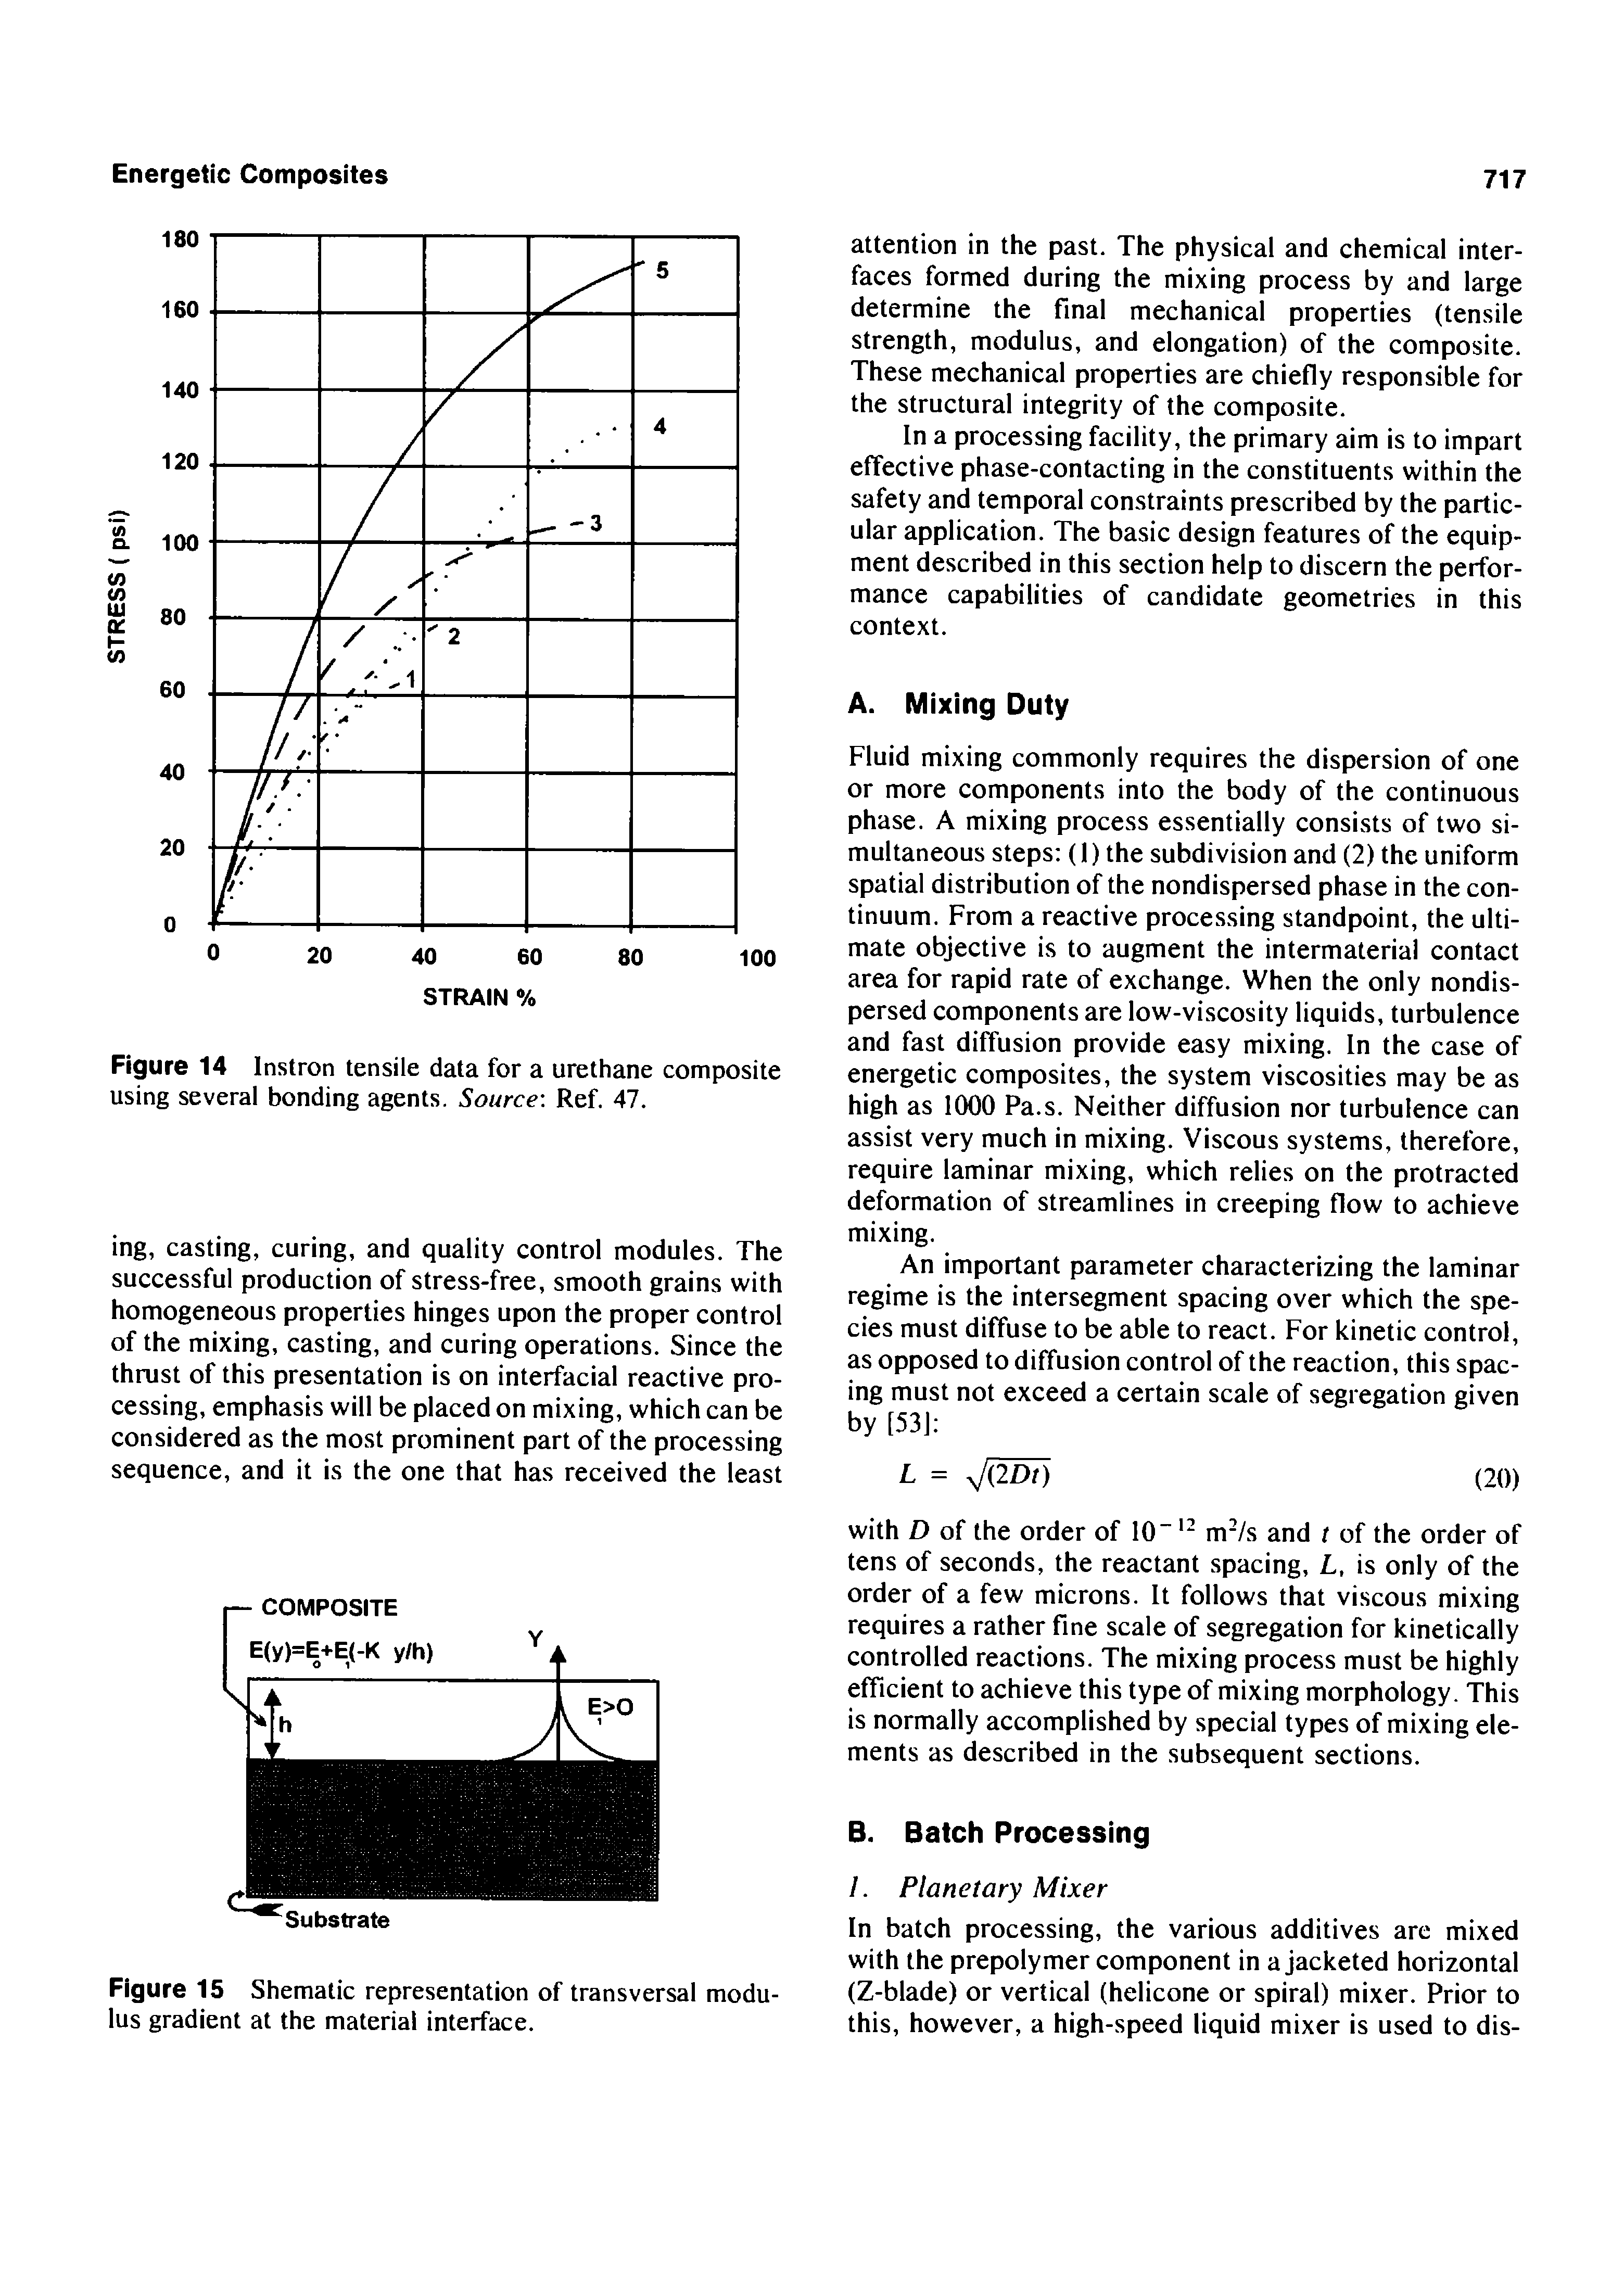 Figure 14 Instron tensile data for a urethane composite using several bonding agents. Source Ref. 47.